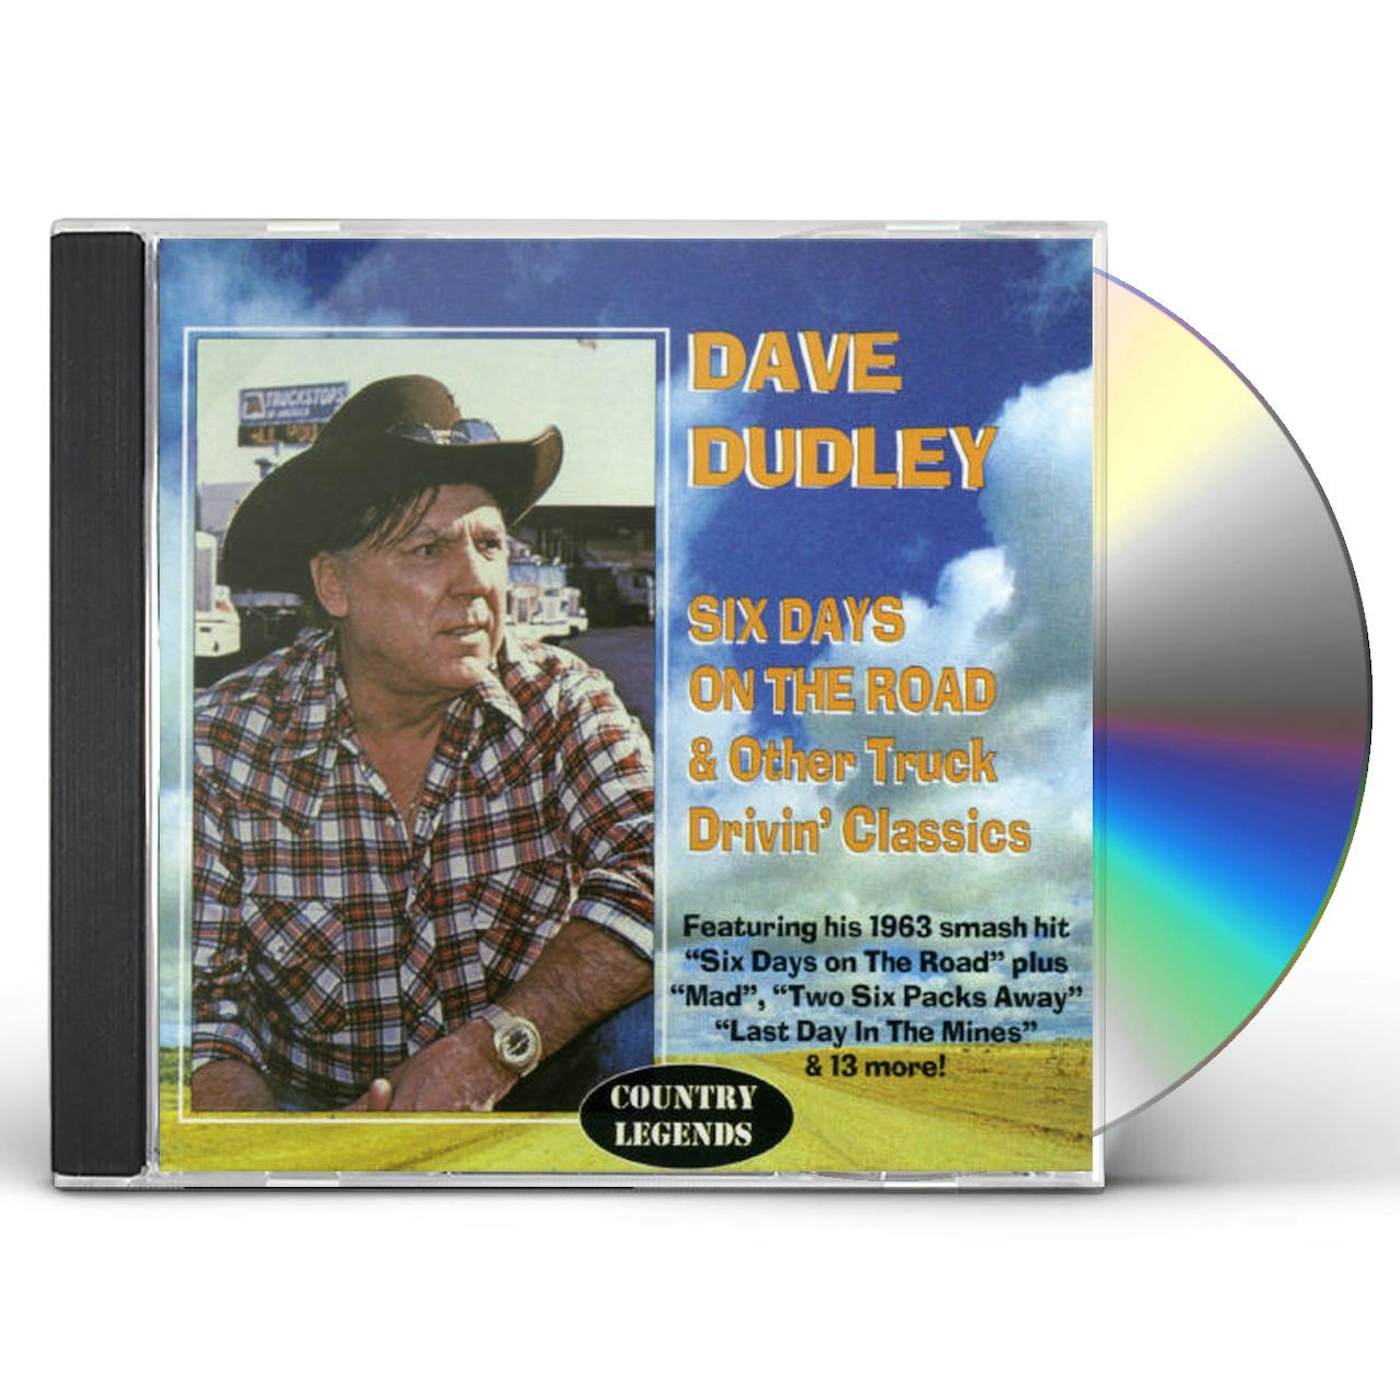 Dave Dudley SIX DAYS ON THE ROAD CD